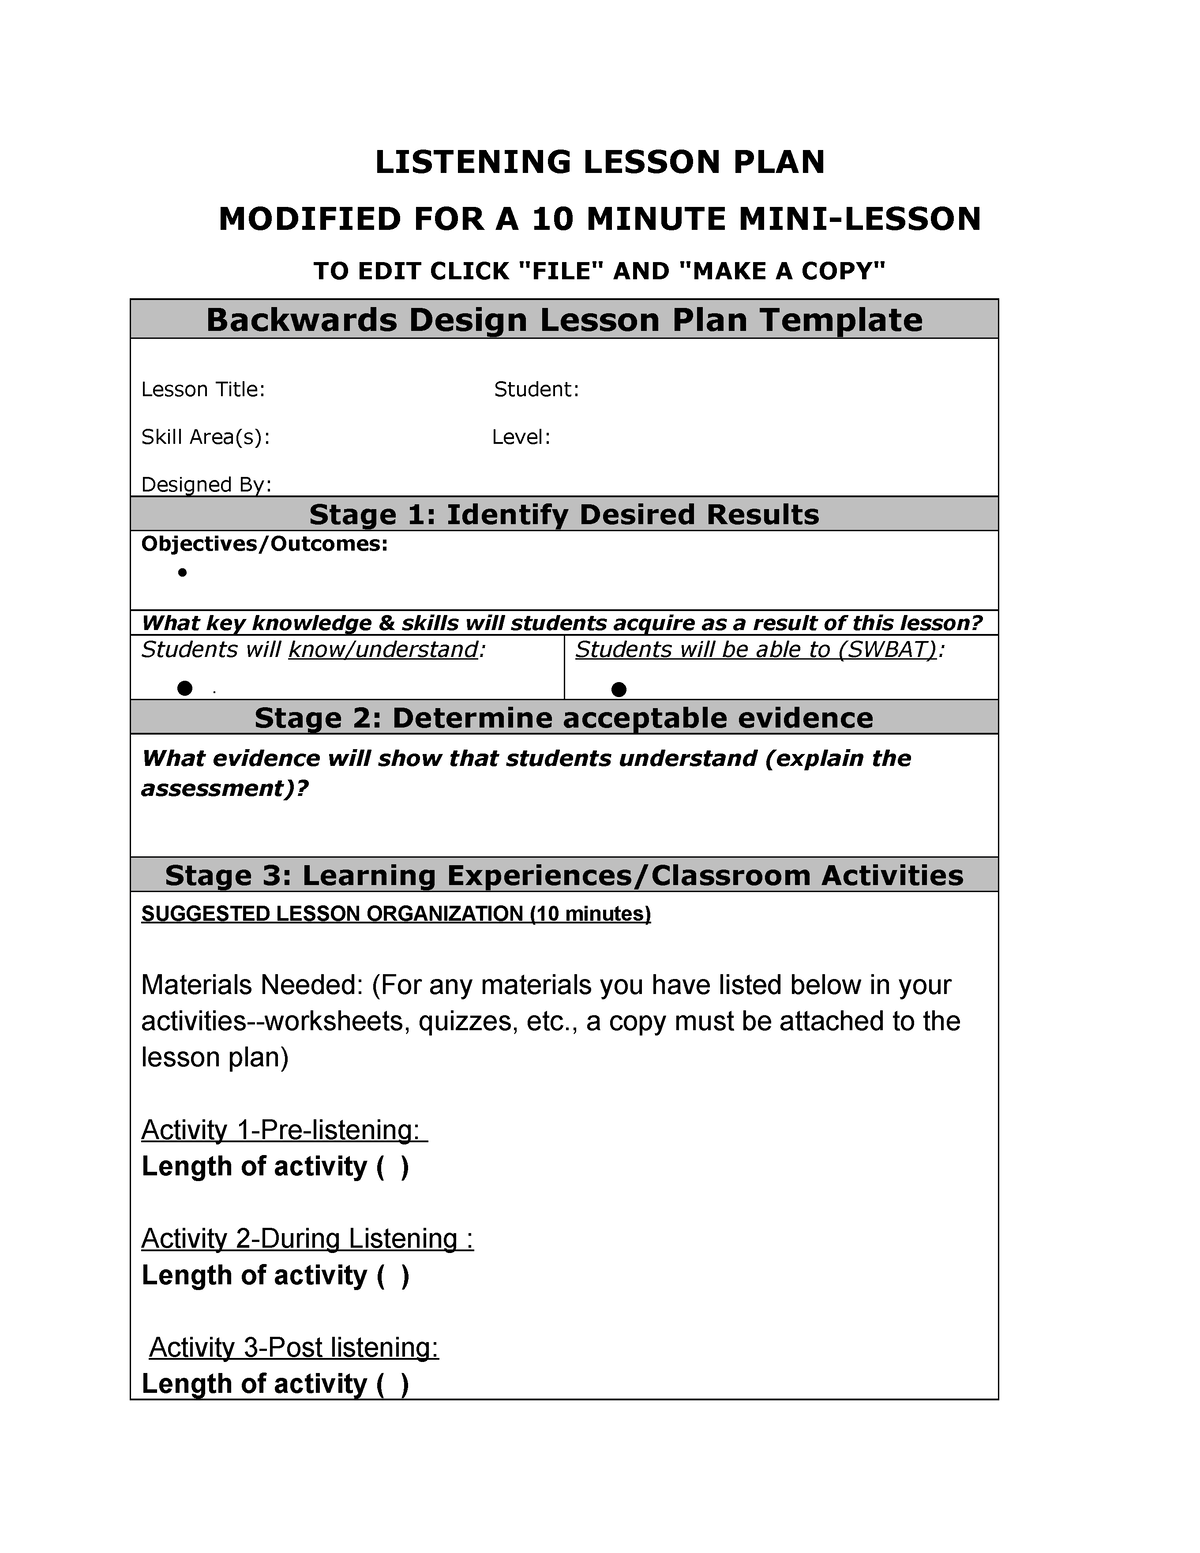 Tesol 101 Wk7 Template For Listening Lesson Plan LISTENING LESSON PLAN MODIFIED FOR A 10